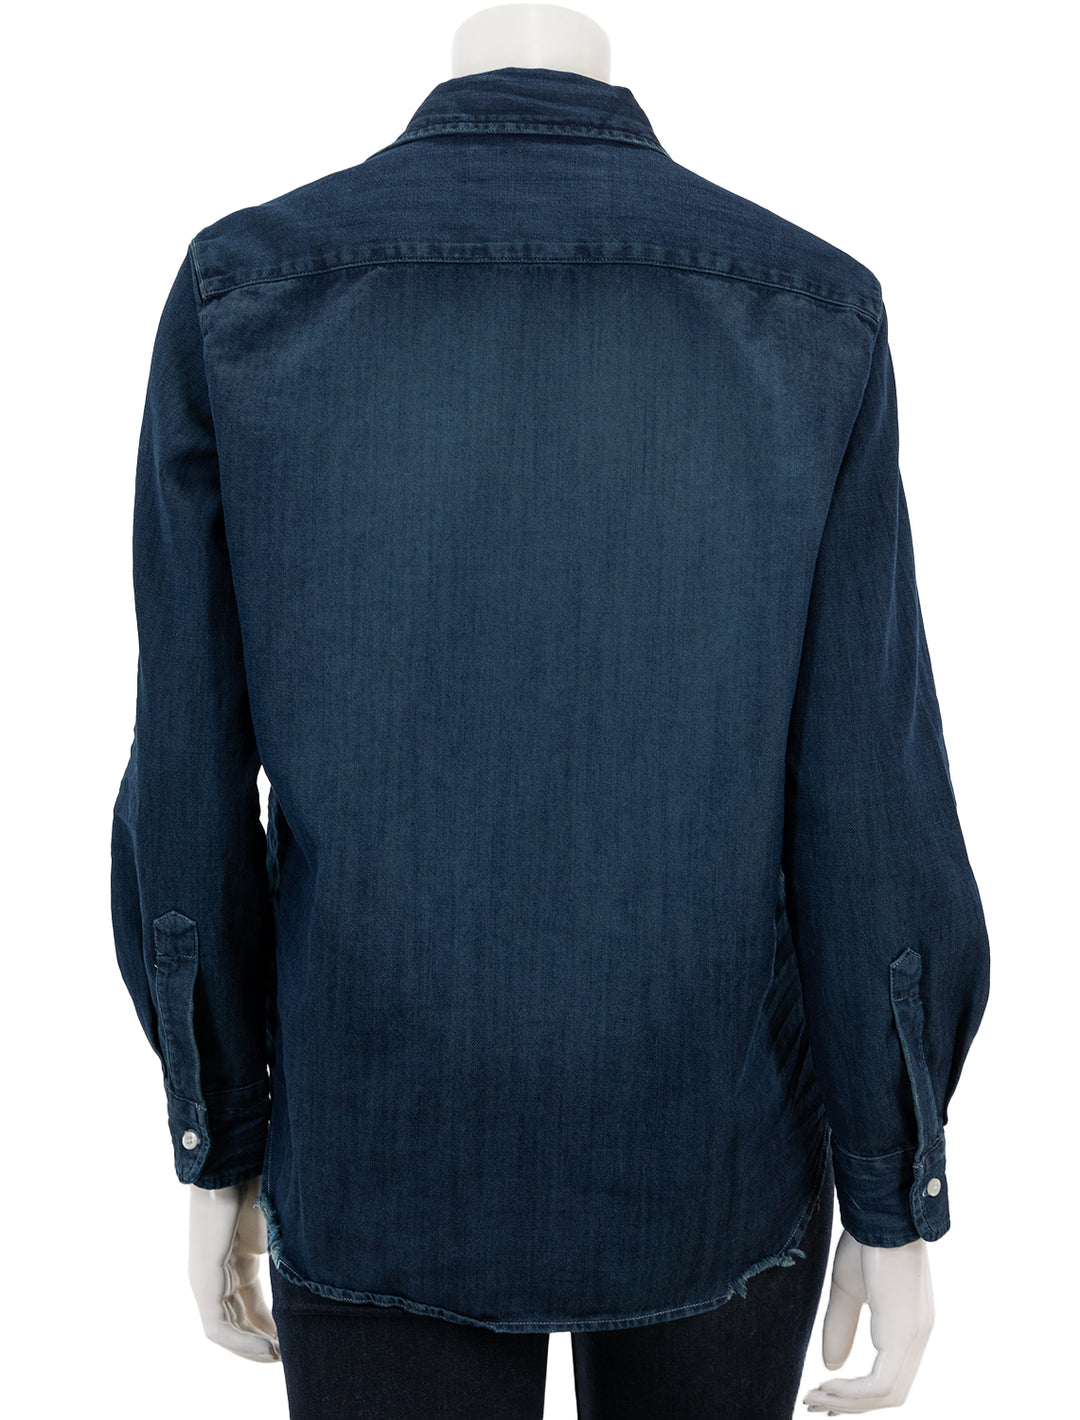 Back view of Frank & Eileen's eileen in overdyed indigo blue.